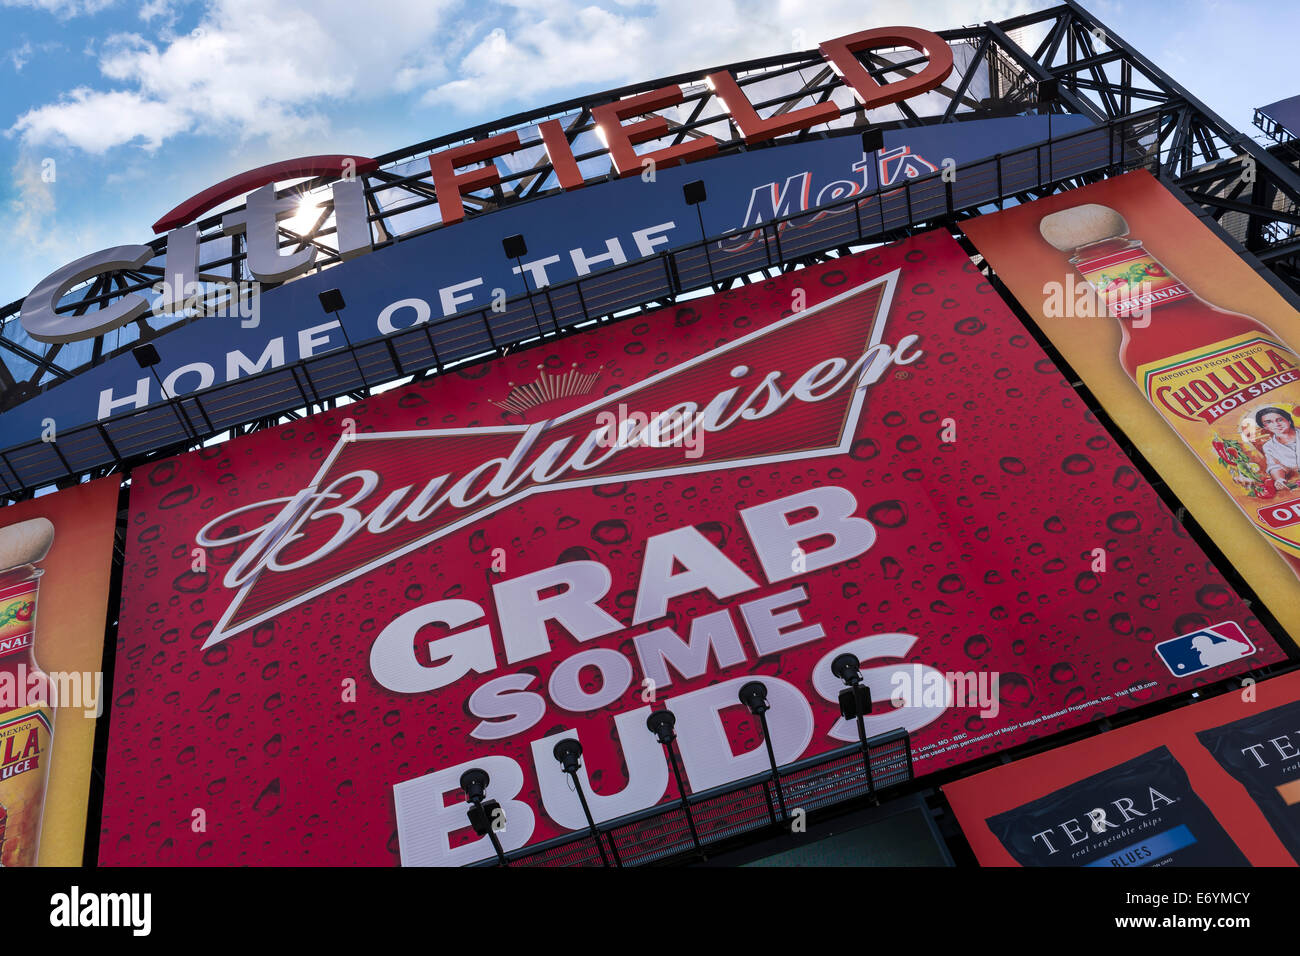 One of the advertising hoardings at Citi Field Stadium - Home of the New York Mets. Stock Photo